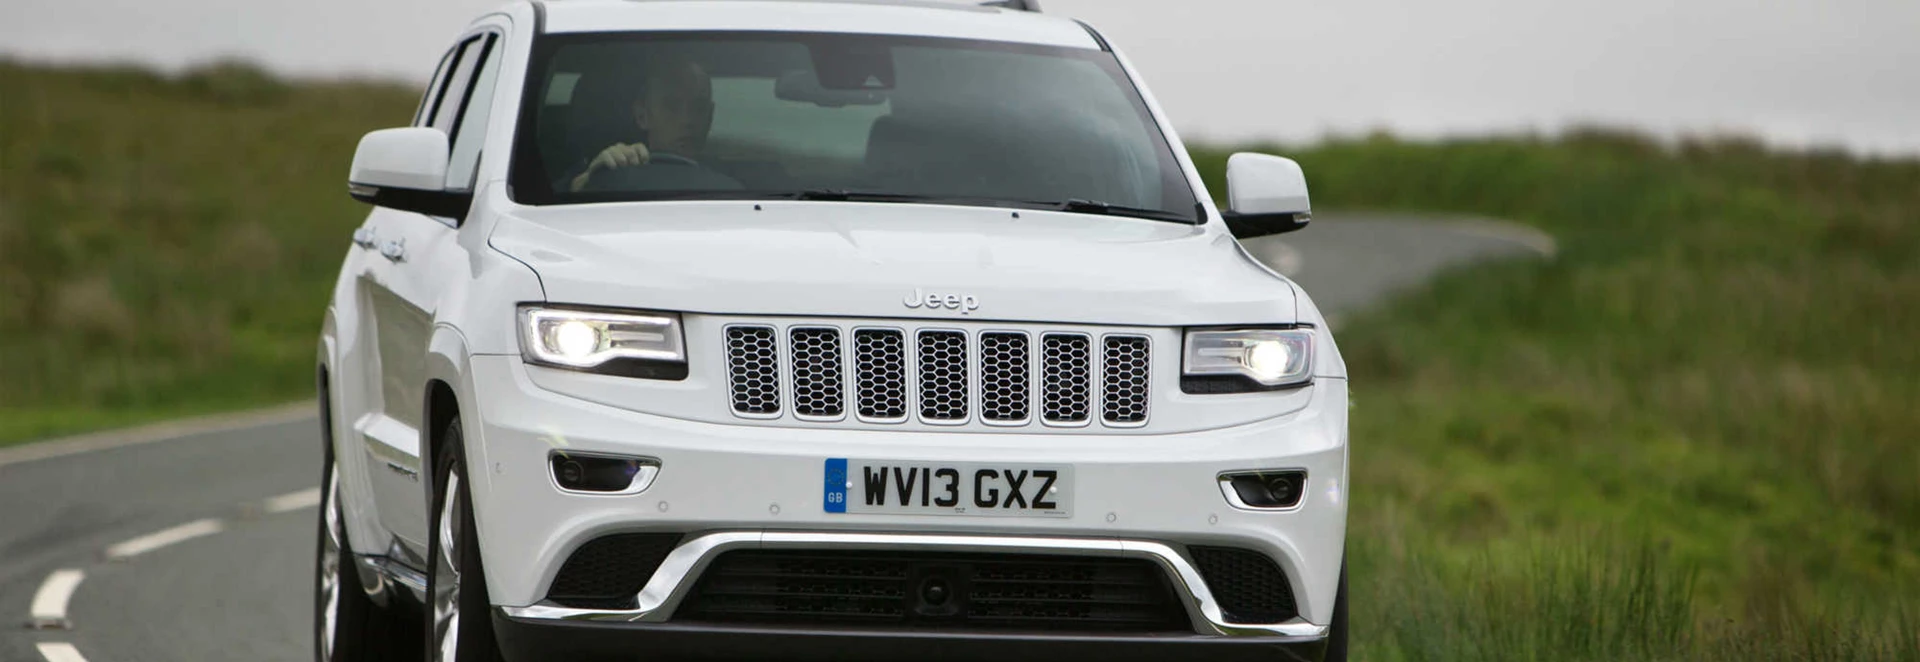 Jeep Grand Cherokee SUV review 